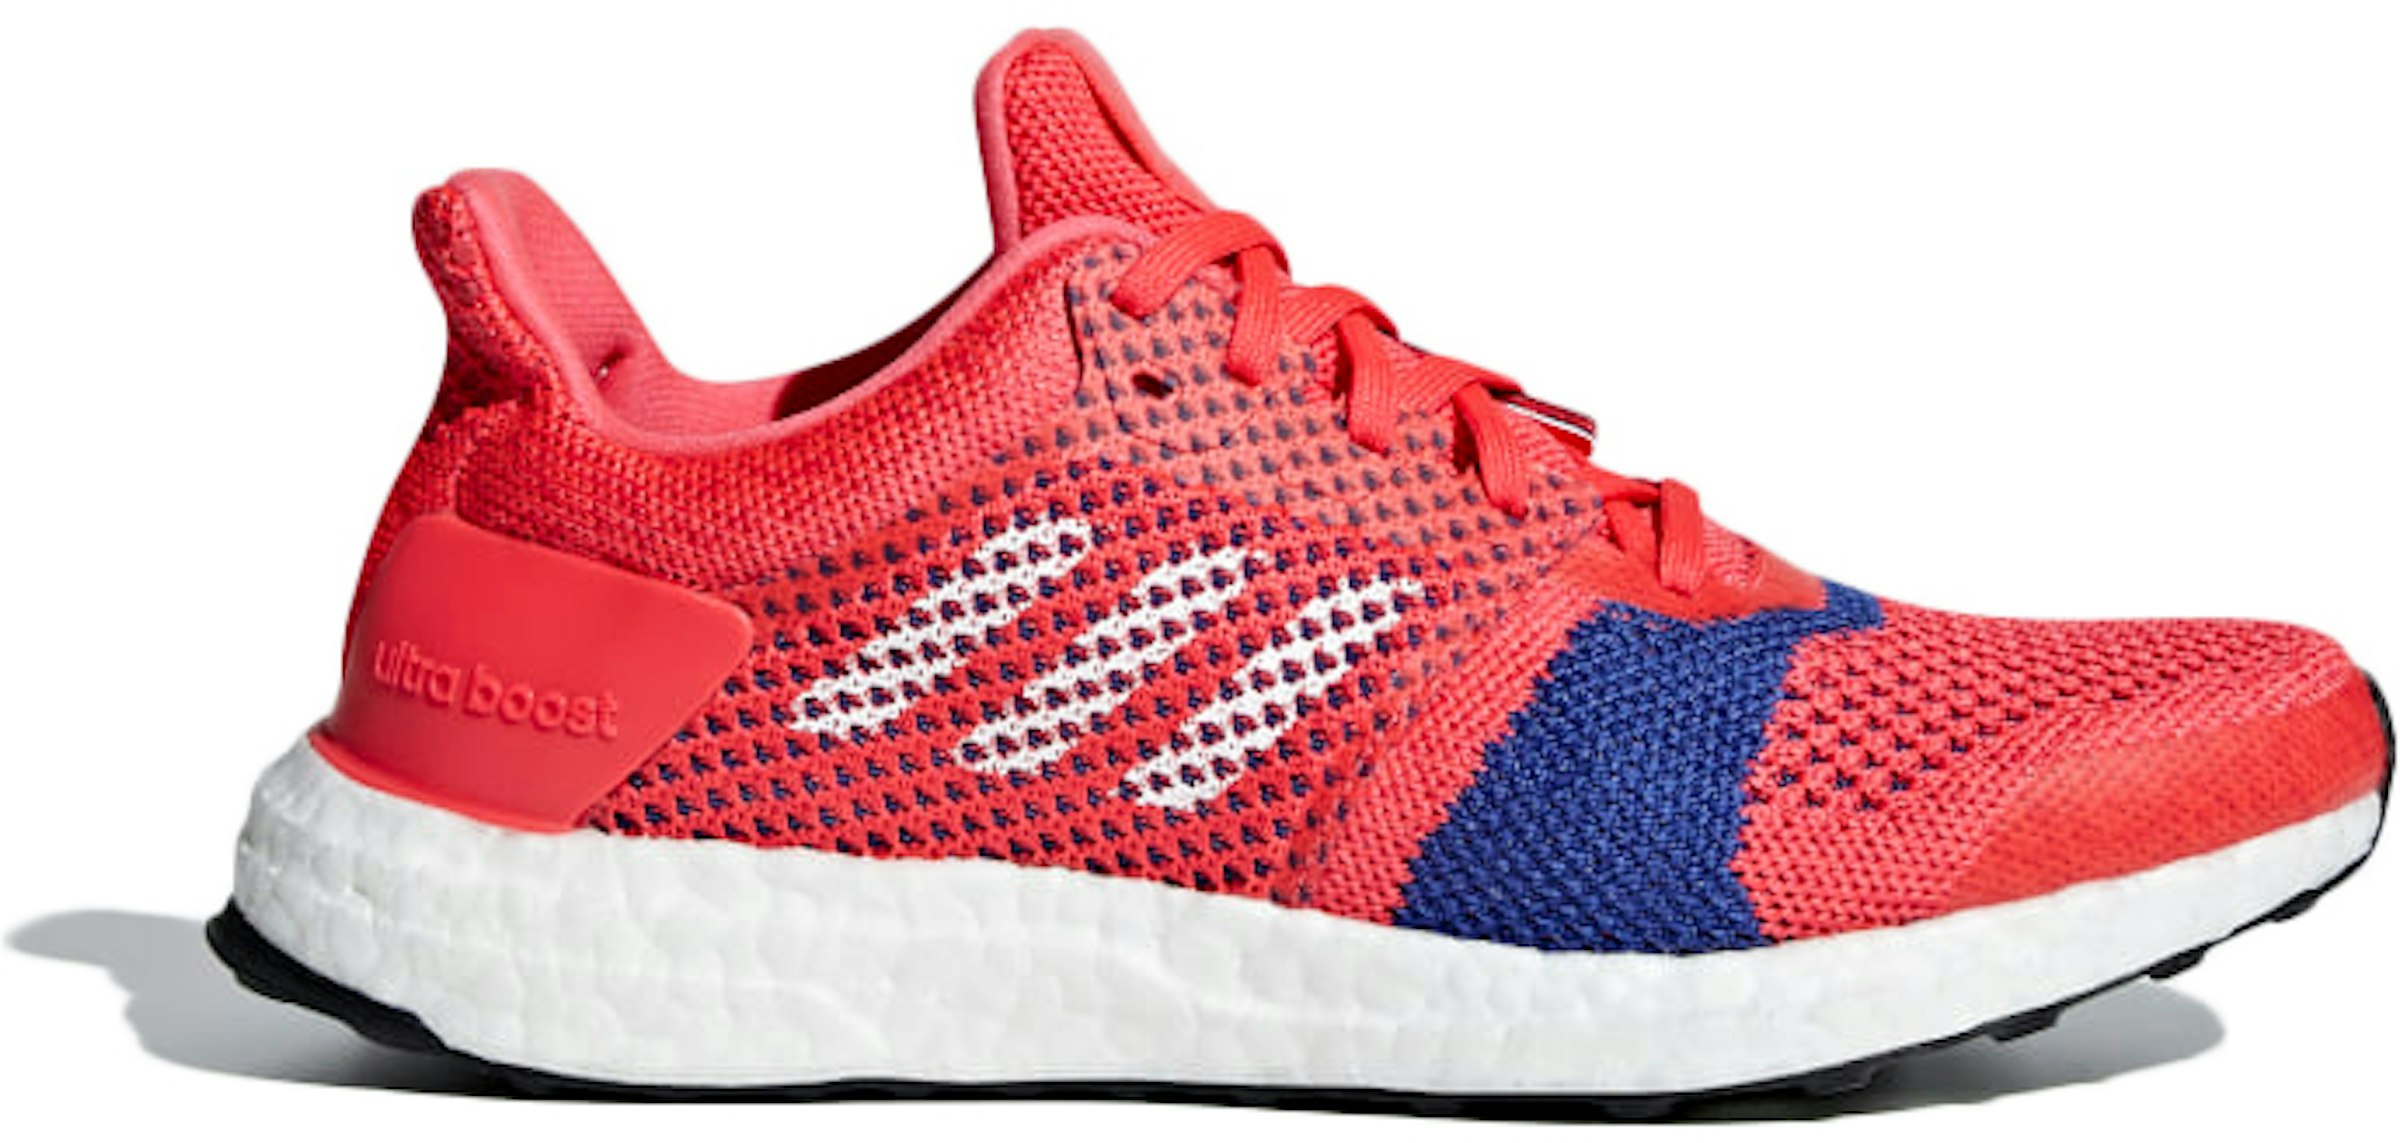 adidas Boost ST Shock Red Blue (Women's) - - US